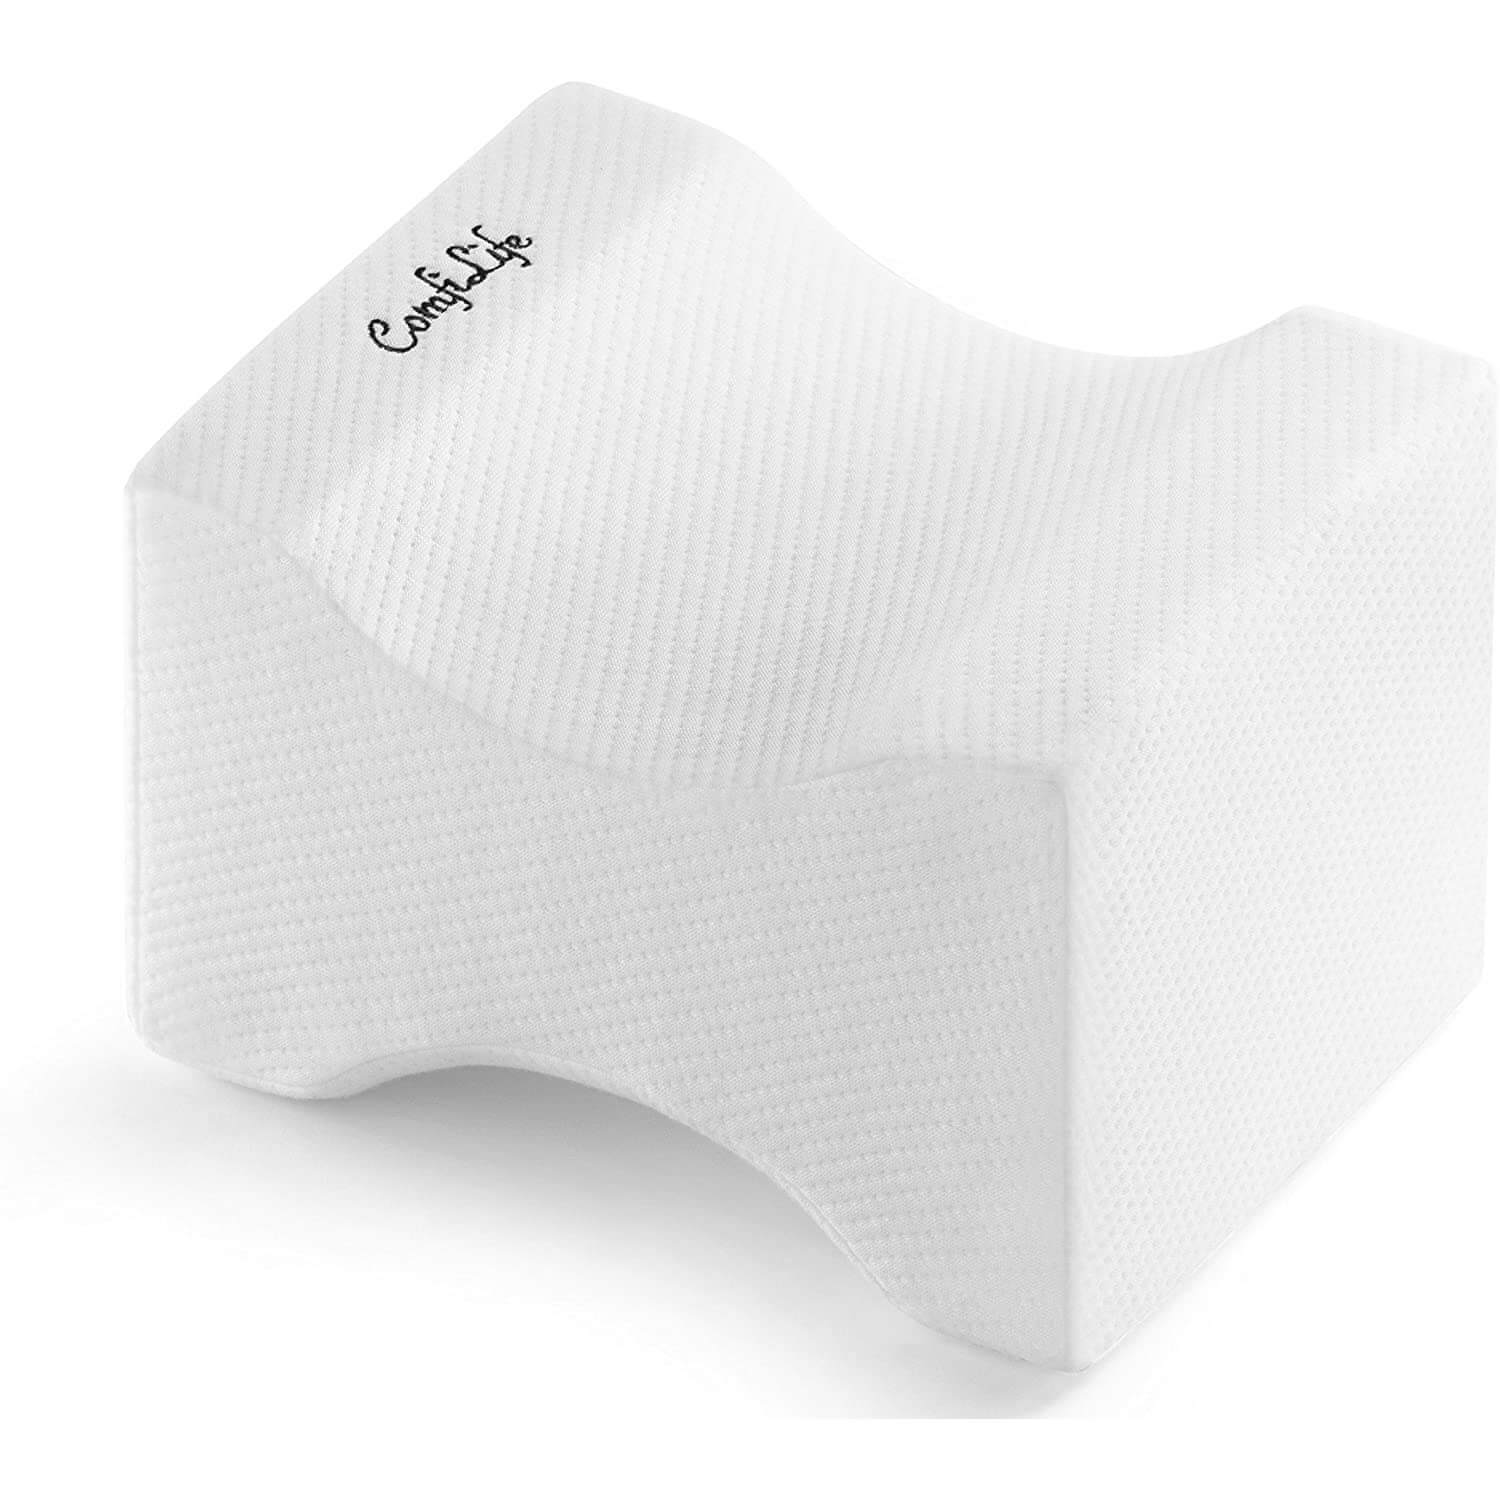 MINUPWELL Knee Pillow for Side Sleepers - Between Leg & Under Knee Pillow  for Back Sleepers - Leg Pillow with 850G 7D Alternative for Relieving Leg